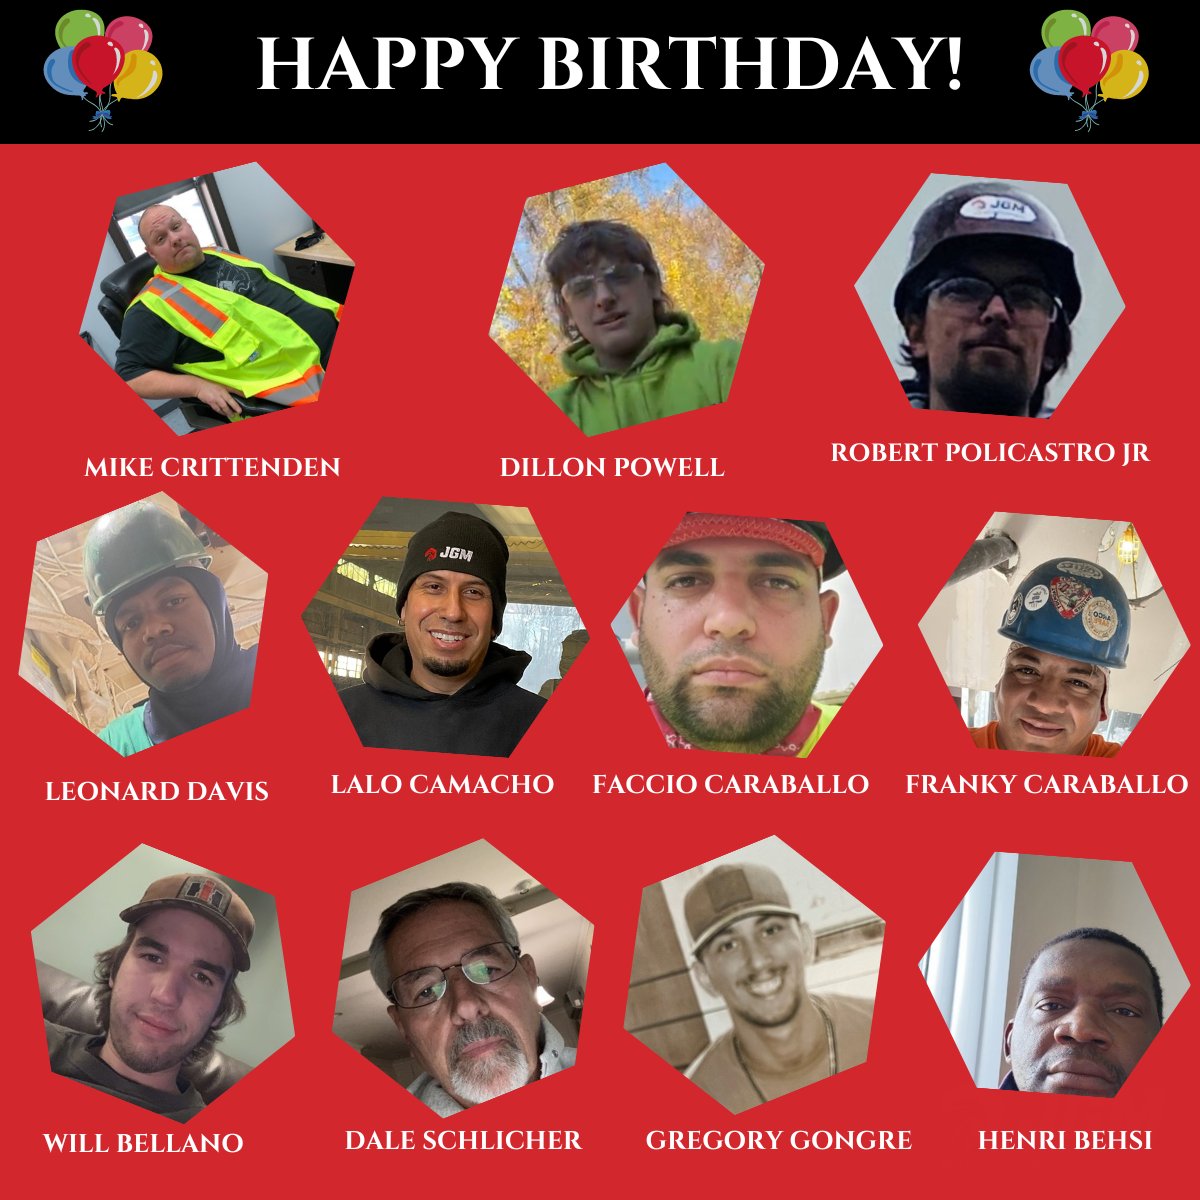 Happy Birthday to the following @jgm_steel team members!  We hope you have a wonderful day!  🎂🎈🎉 

#HappyBirthday #FebruaryBirthday #TheJGMFamily #Celebrate